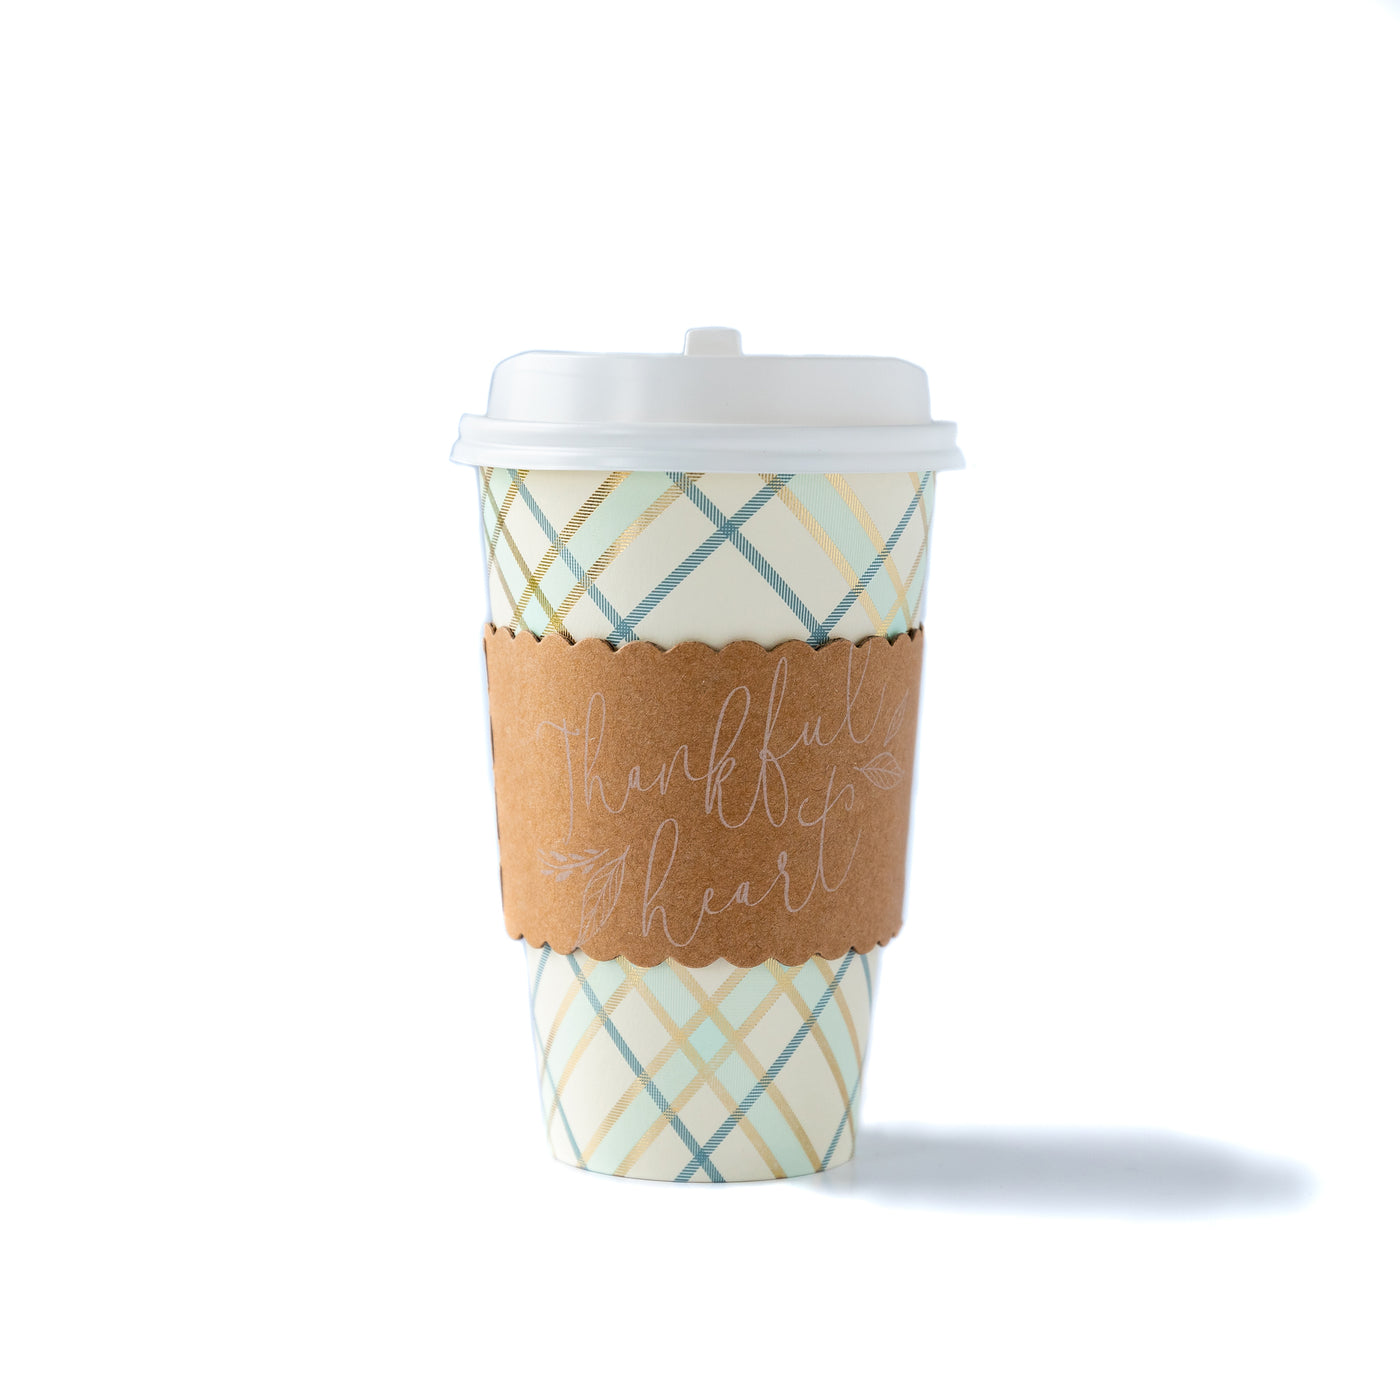 Thankful Heart Coffee Cups 8 count